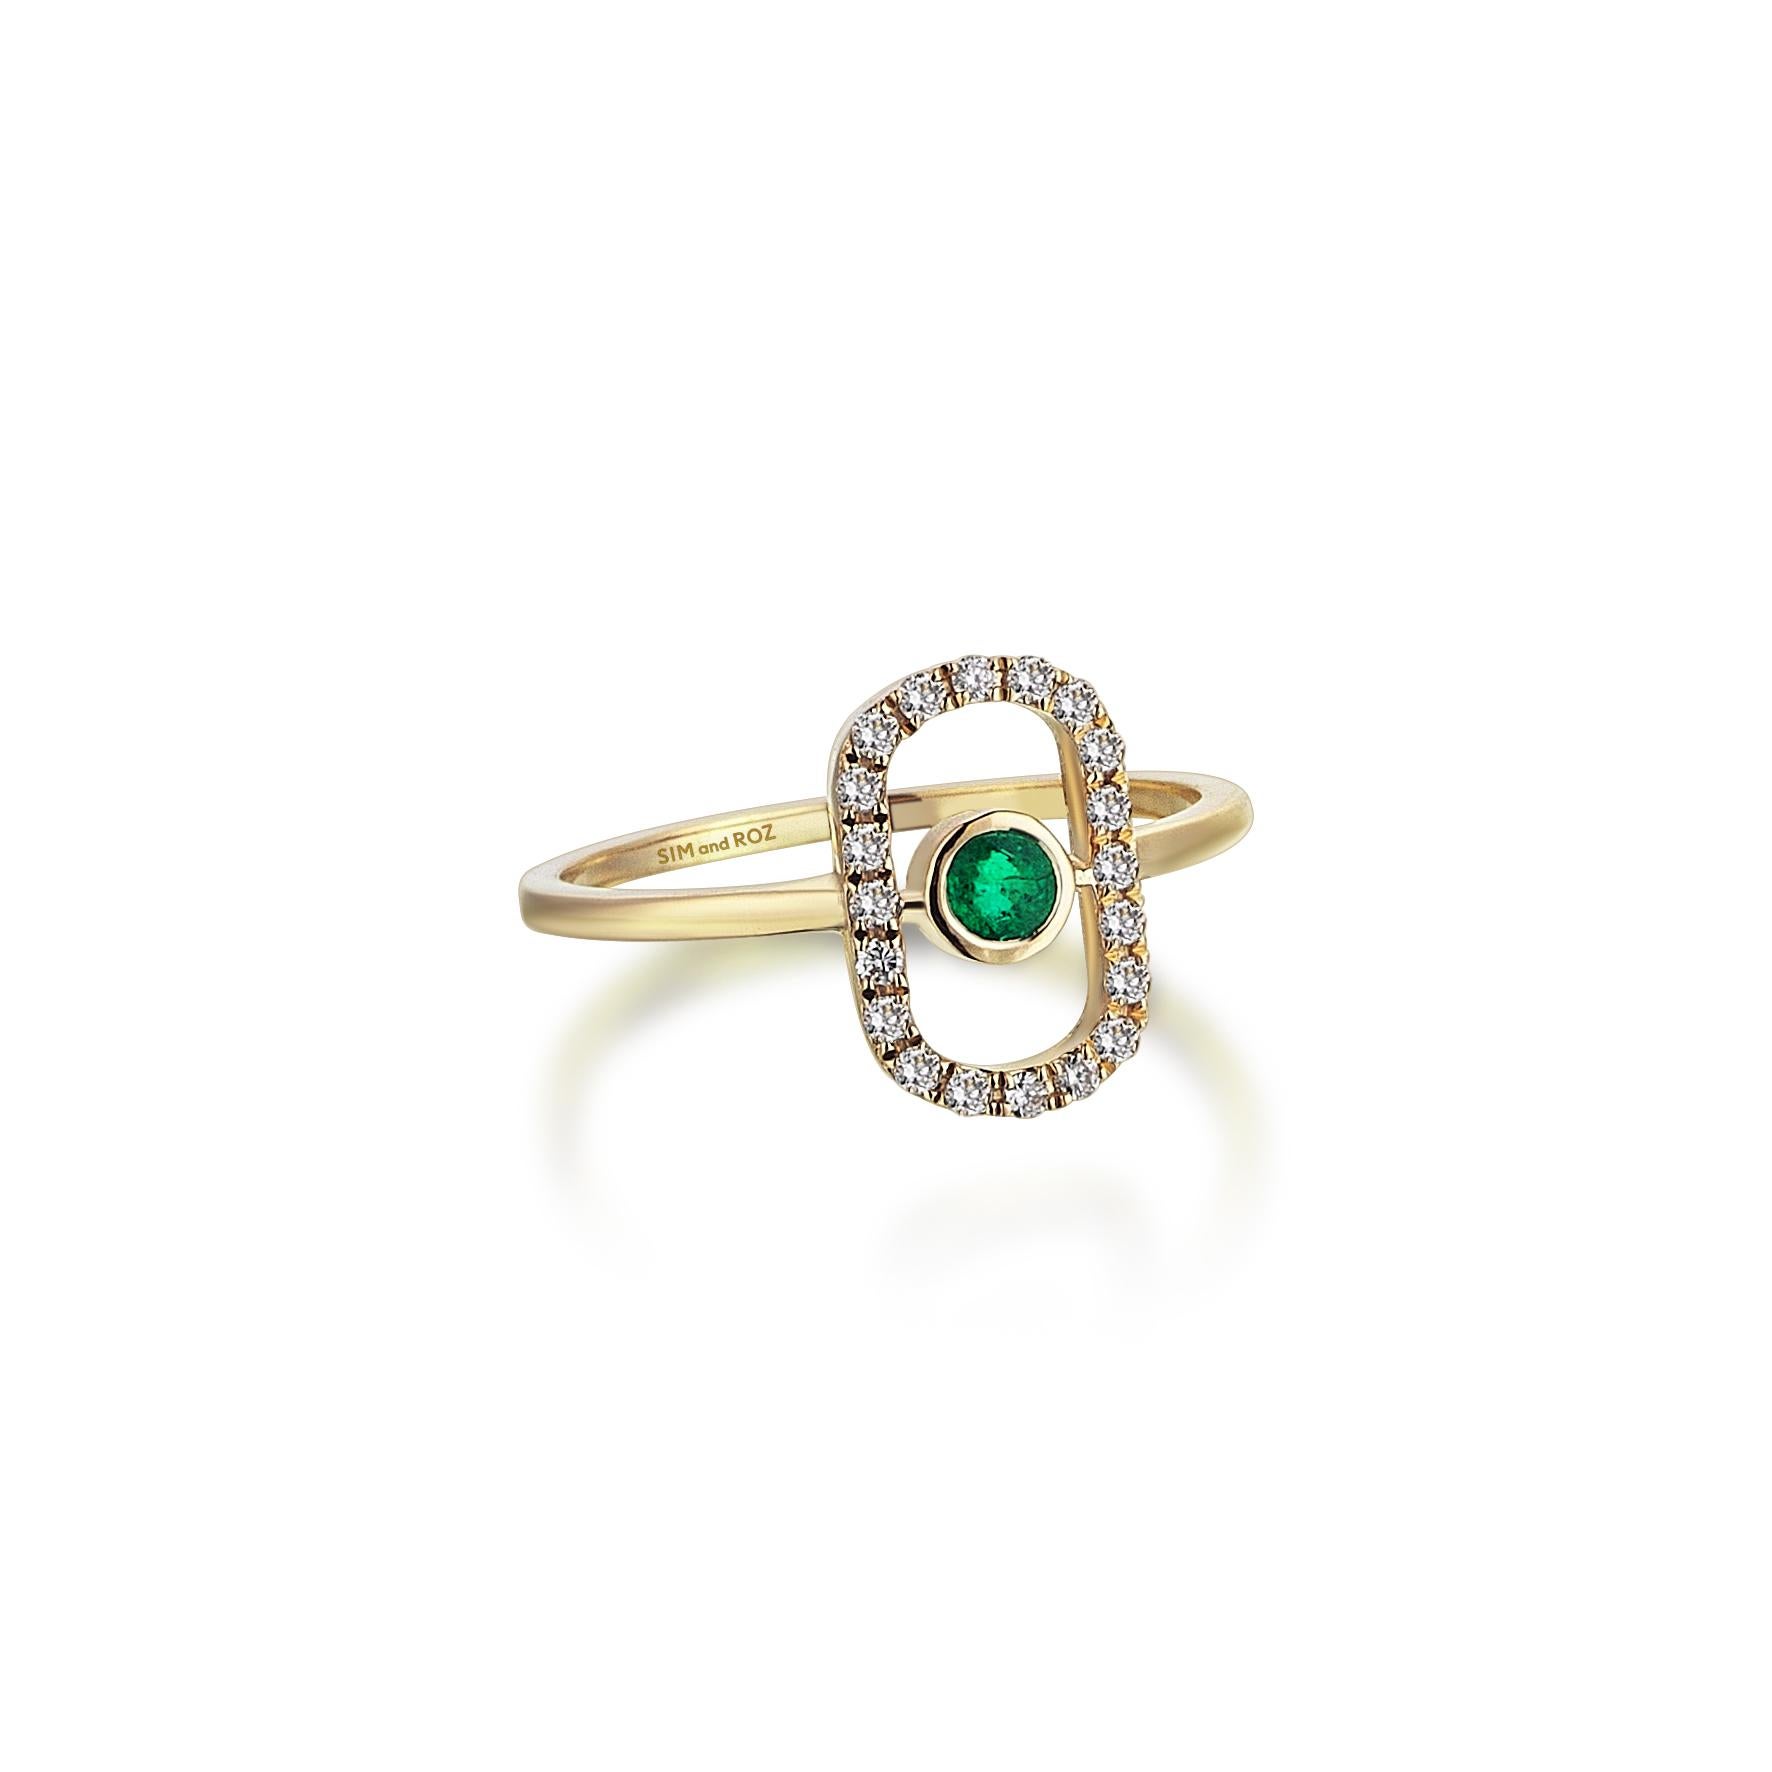 For Sale:  Sim and Roz 14K Yellow Gold Ring with Round Cut Diamonds and Emerald 3